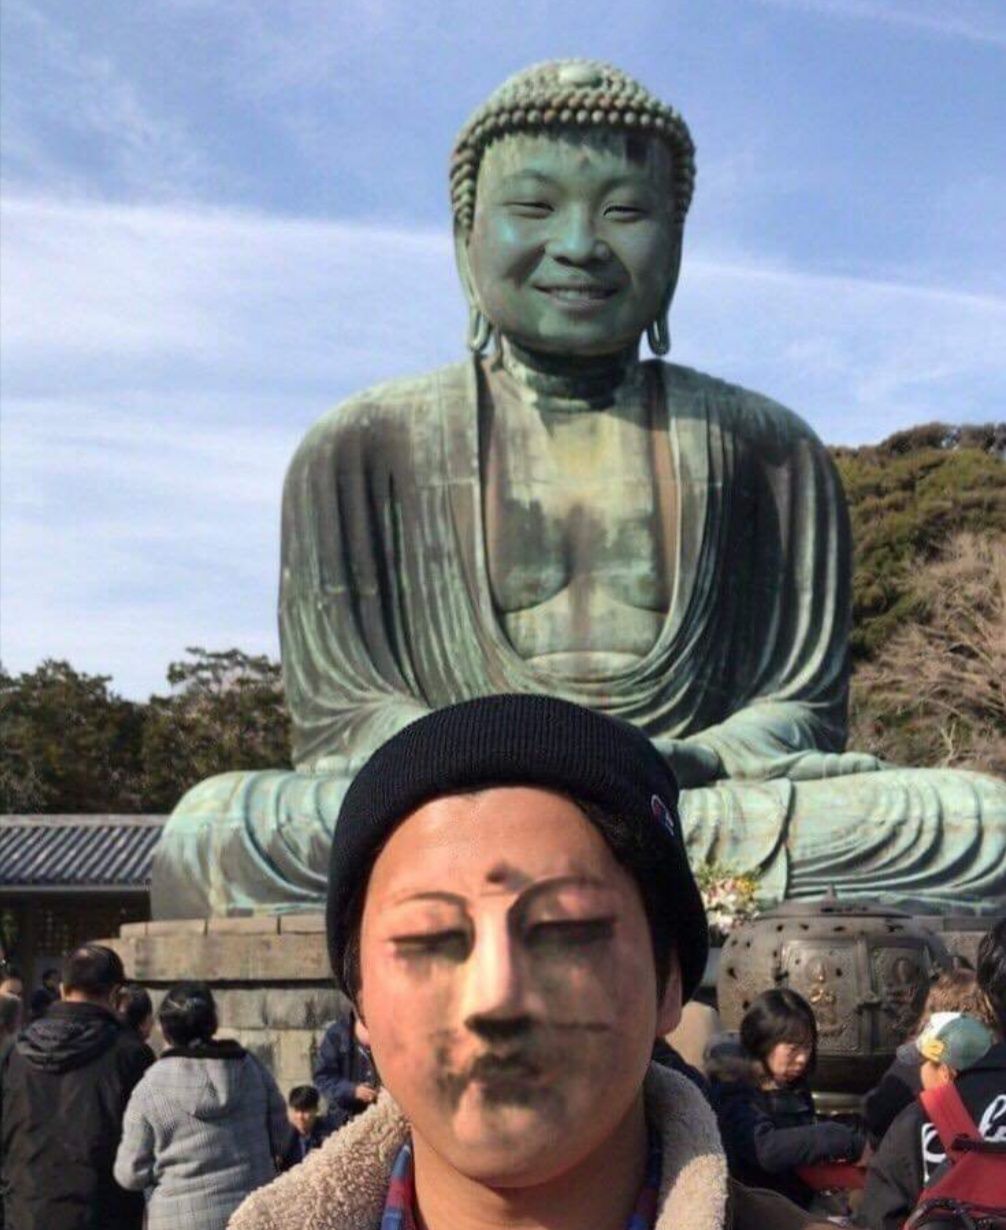 Next level face swapping!